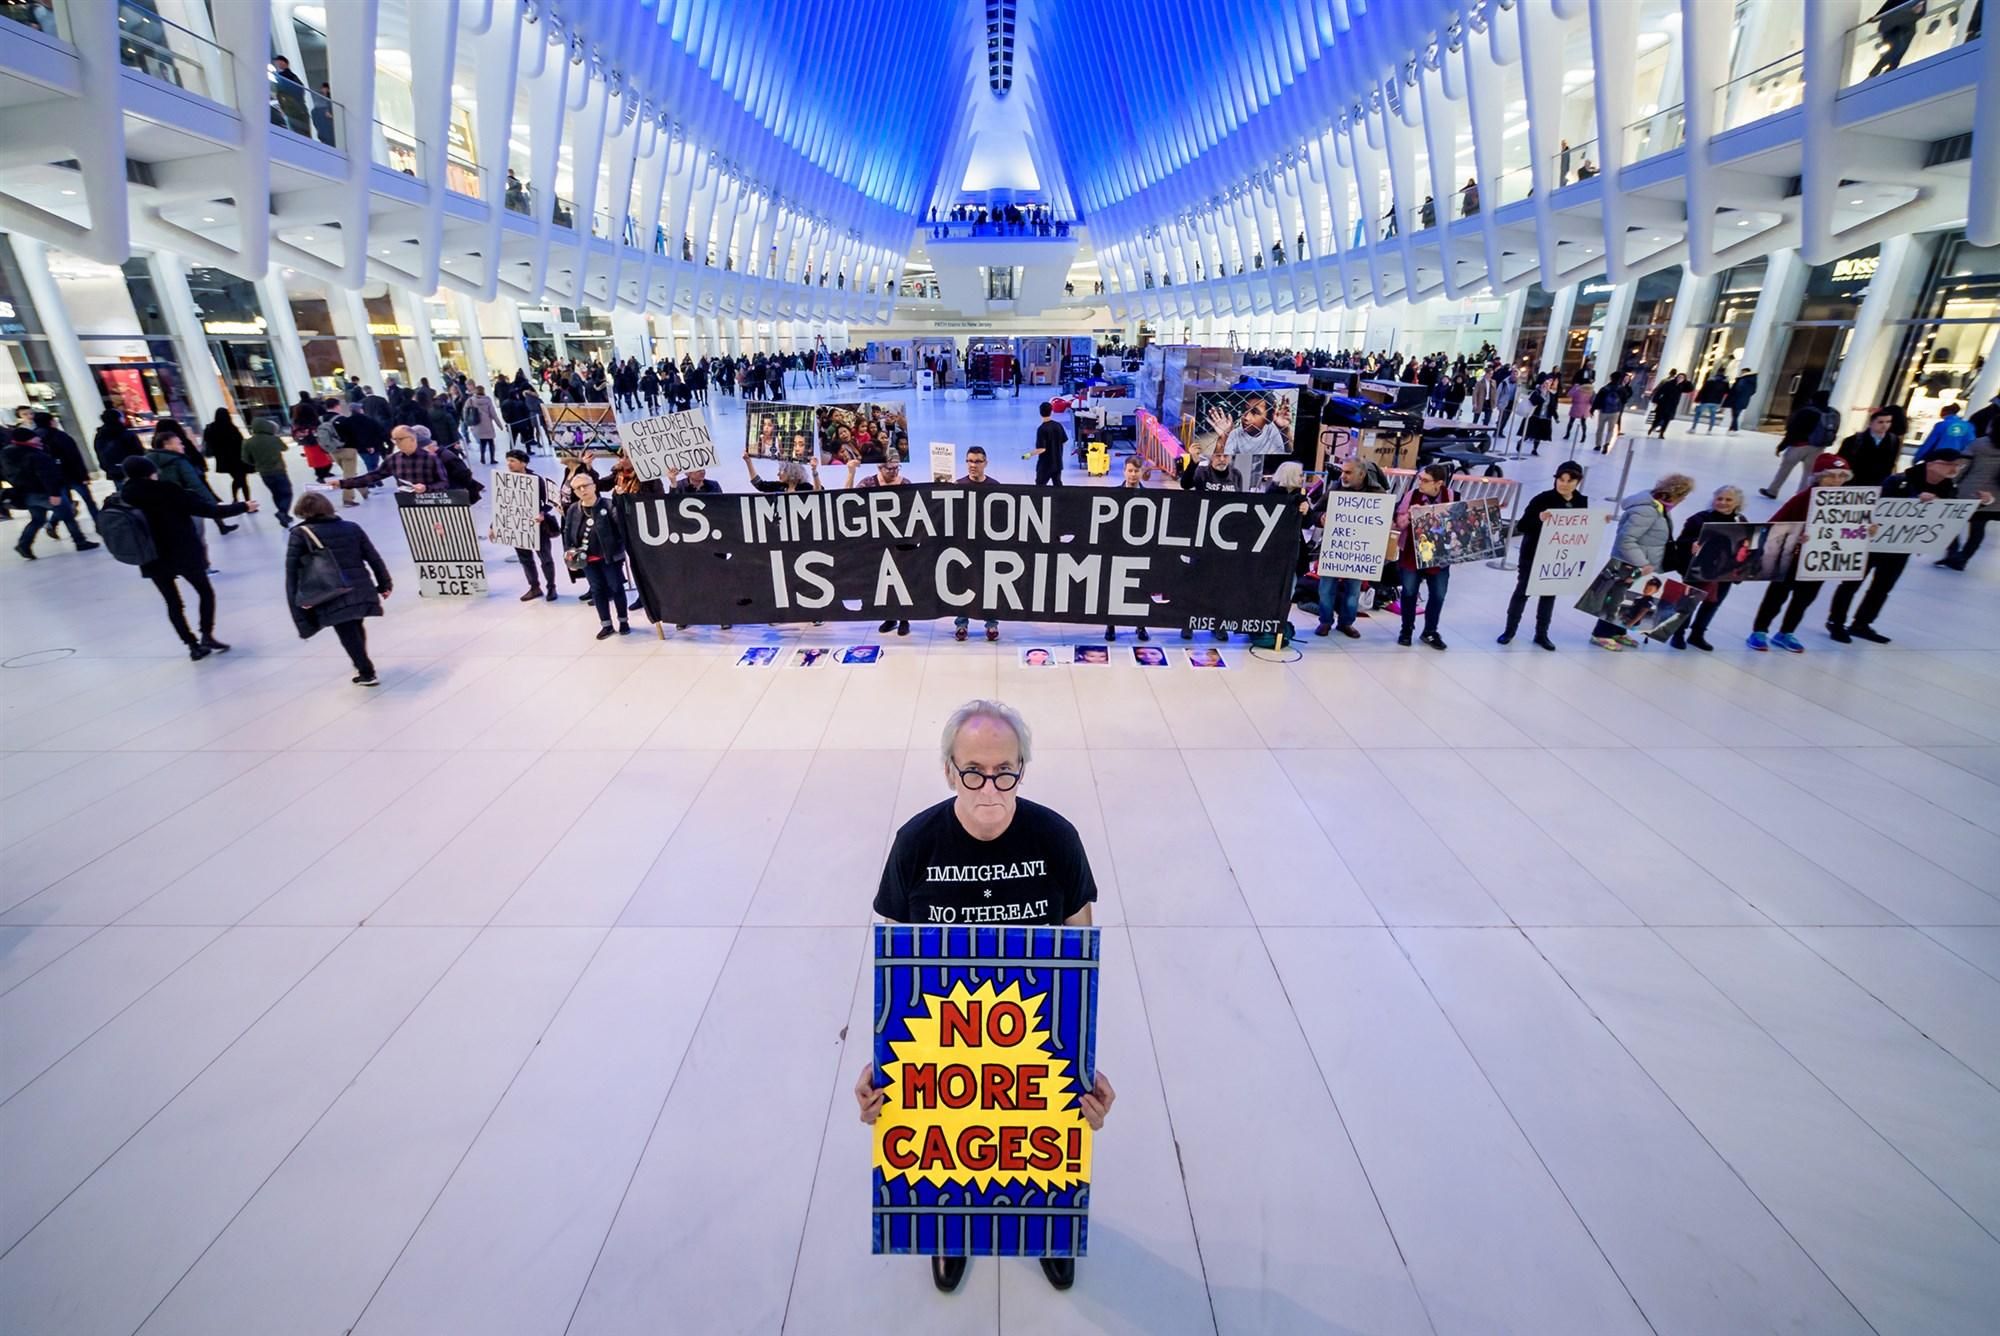 A silent protest in New York's World Trade Center on Jan. 6, 2020 in support of children who have died in ICE custody. (Photo: Erik McGregor / LightRocket via Getty Images)